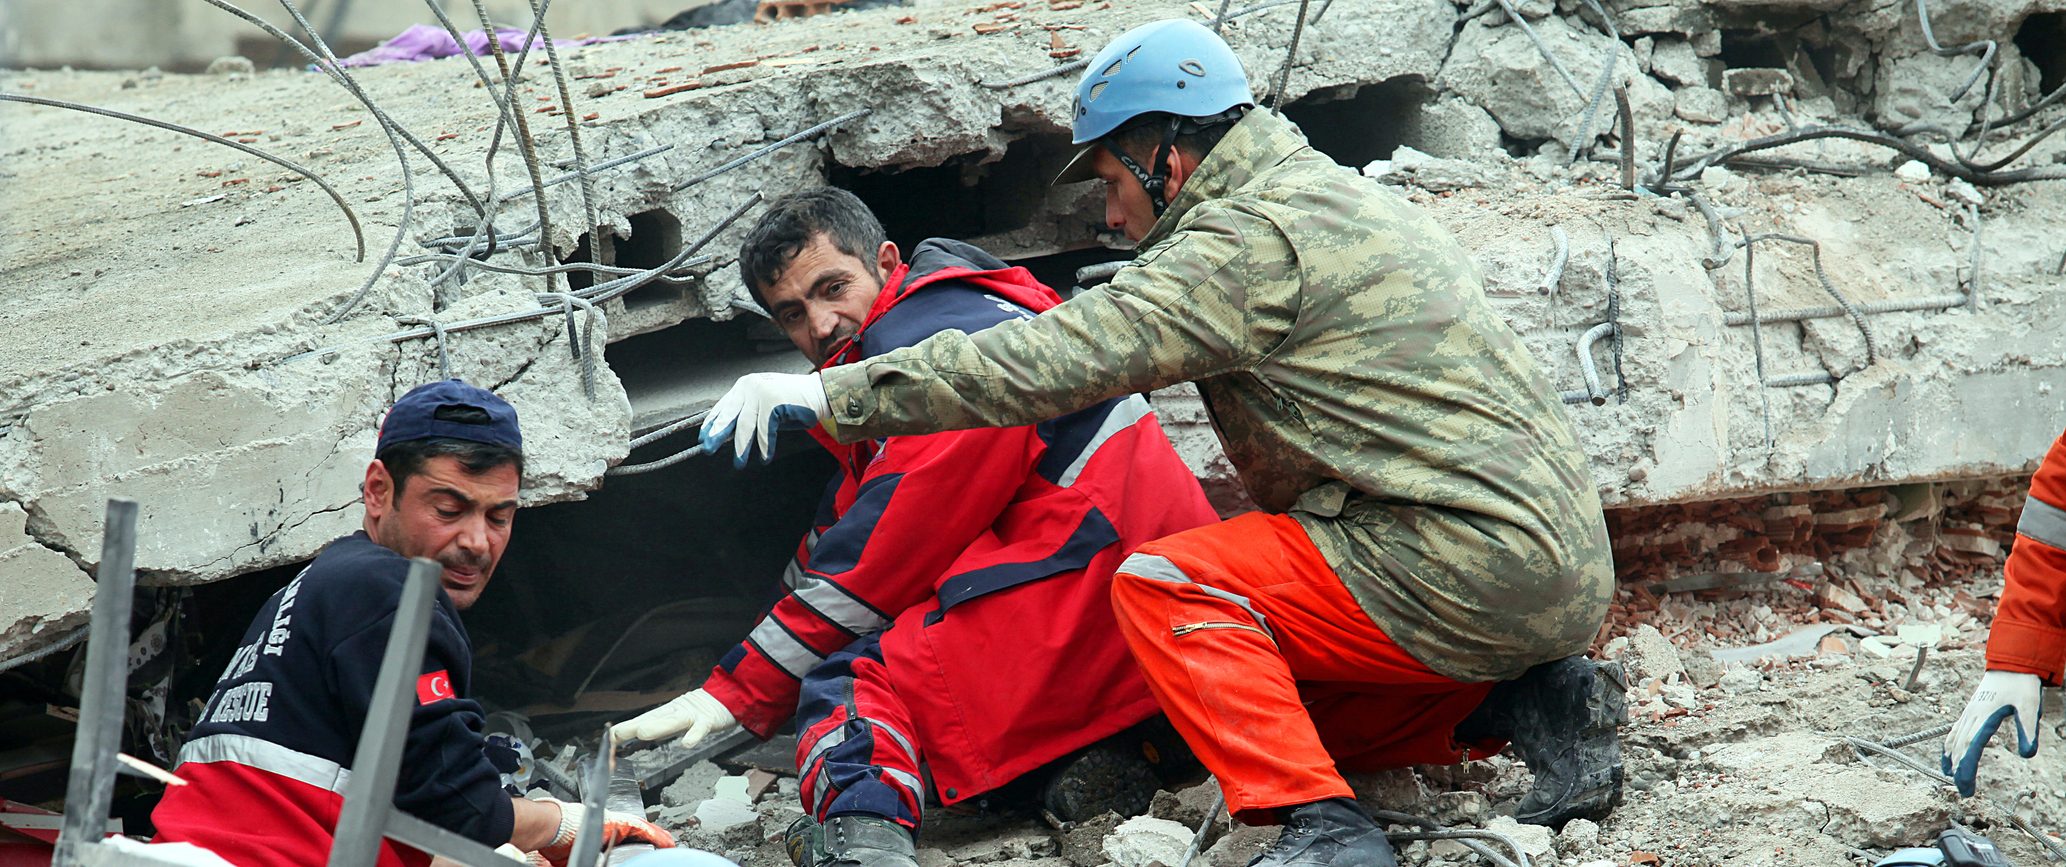 Rescue team is searching for the wounded under the debris